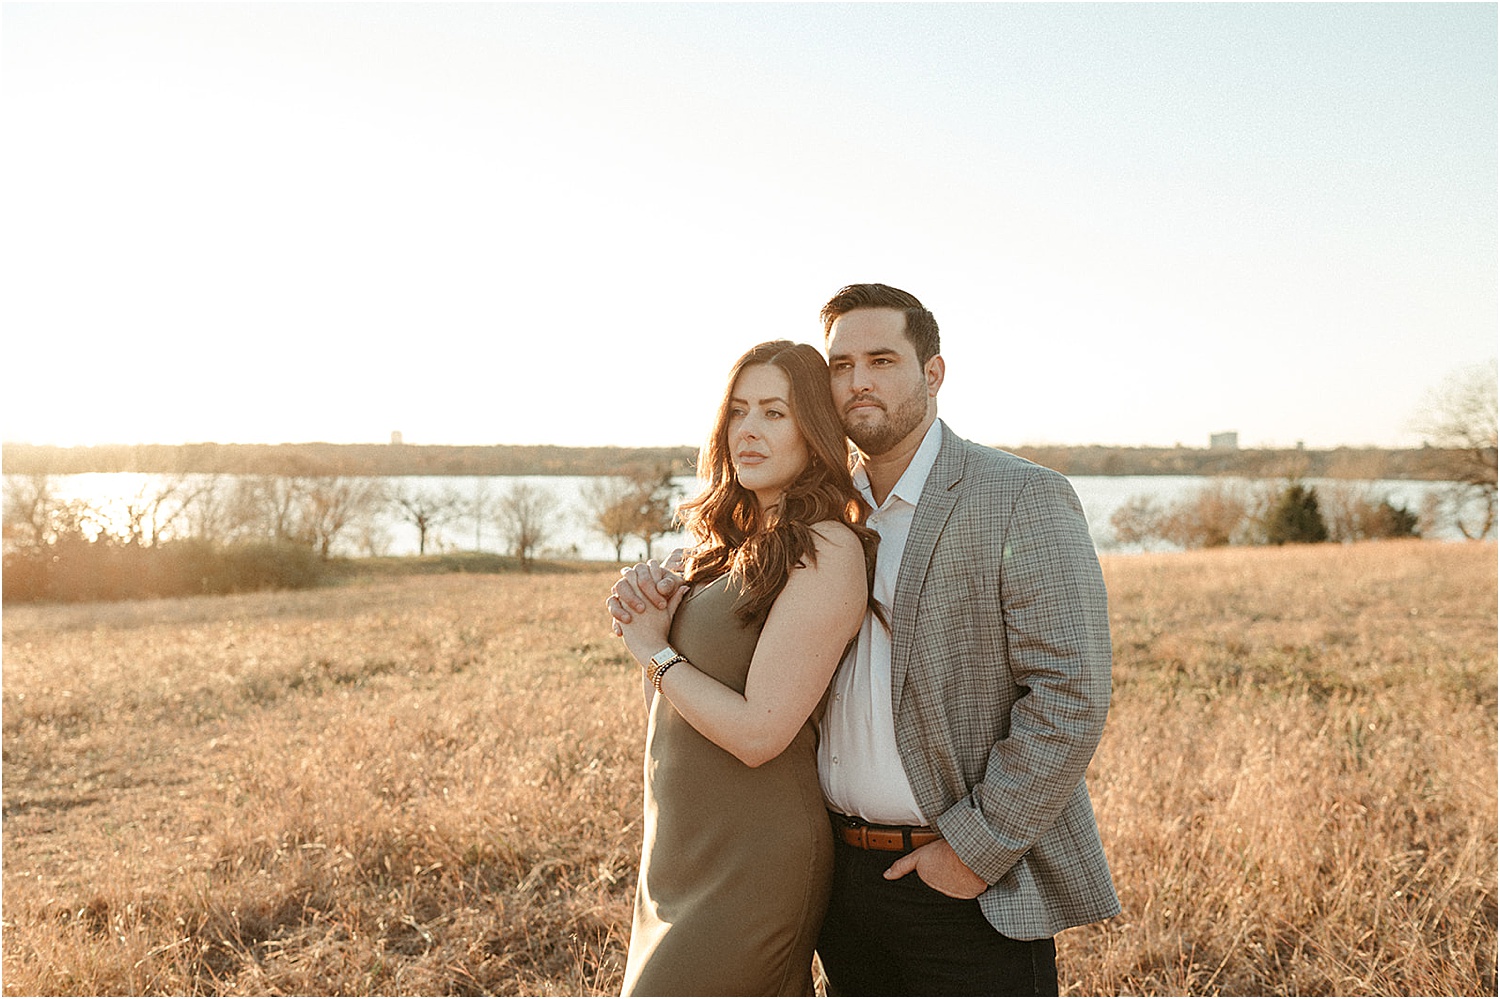 Candyce and Matt's Texas engagement captured by Vanessa Martins Photo